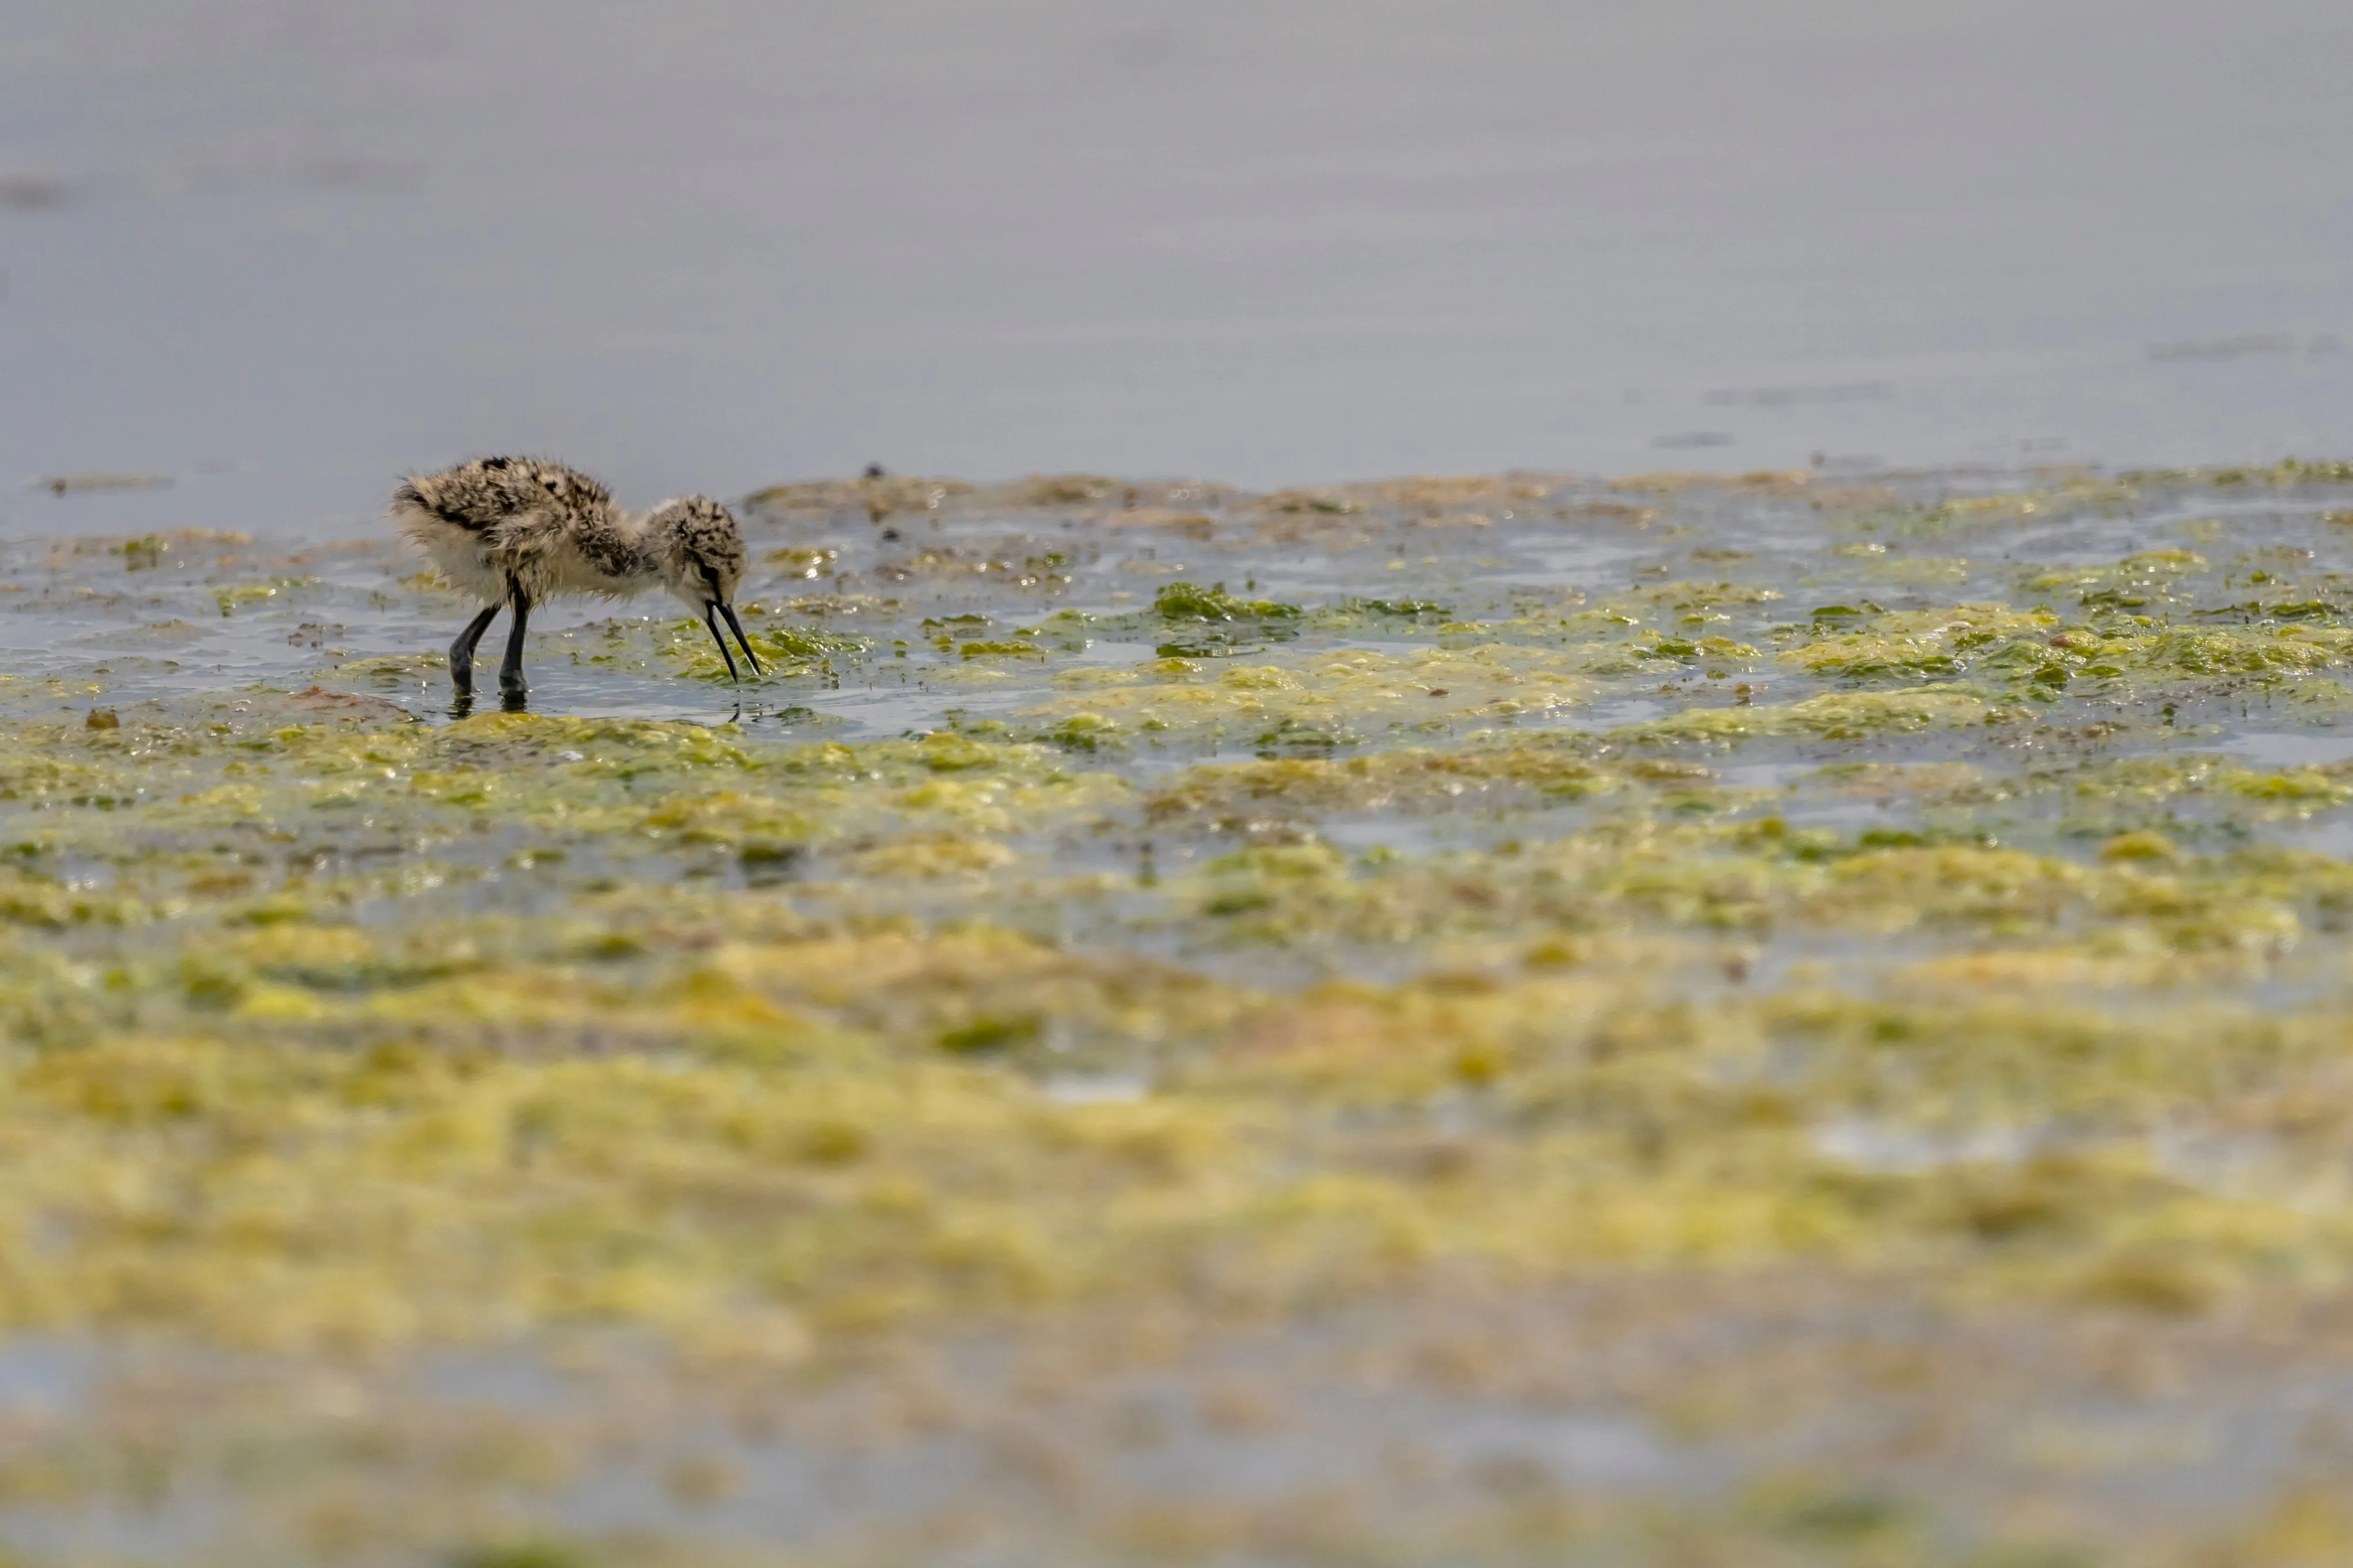 A lone Black-winged Stilt chick feeding in the moss on top of shallow waters.